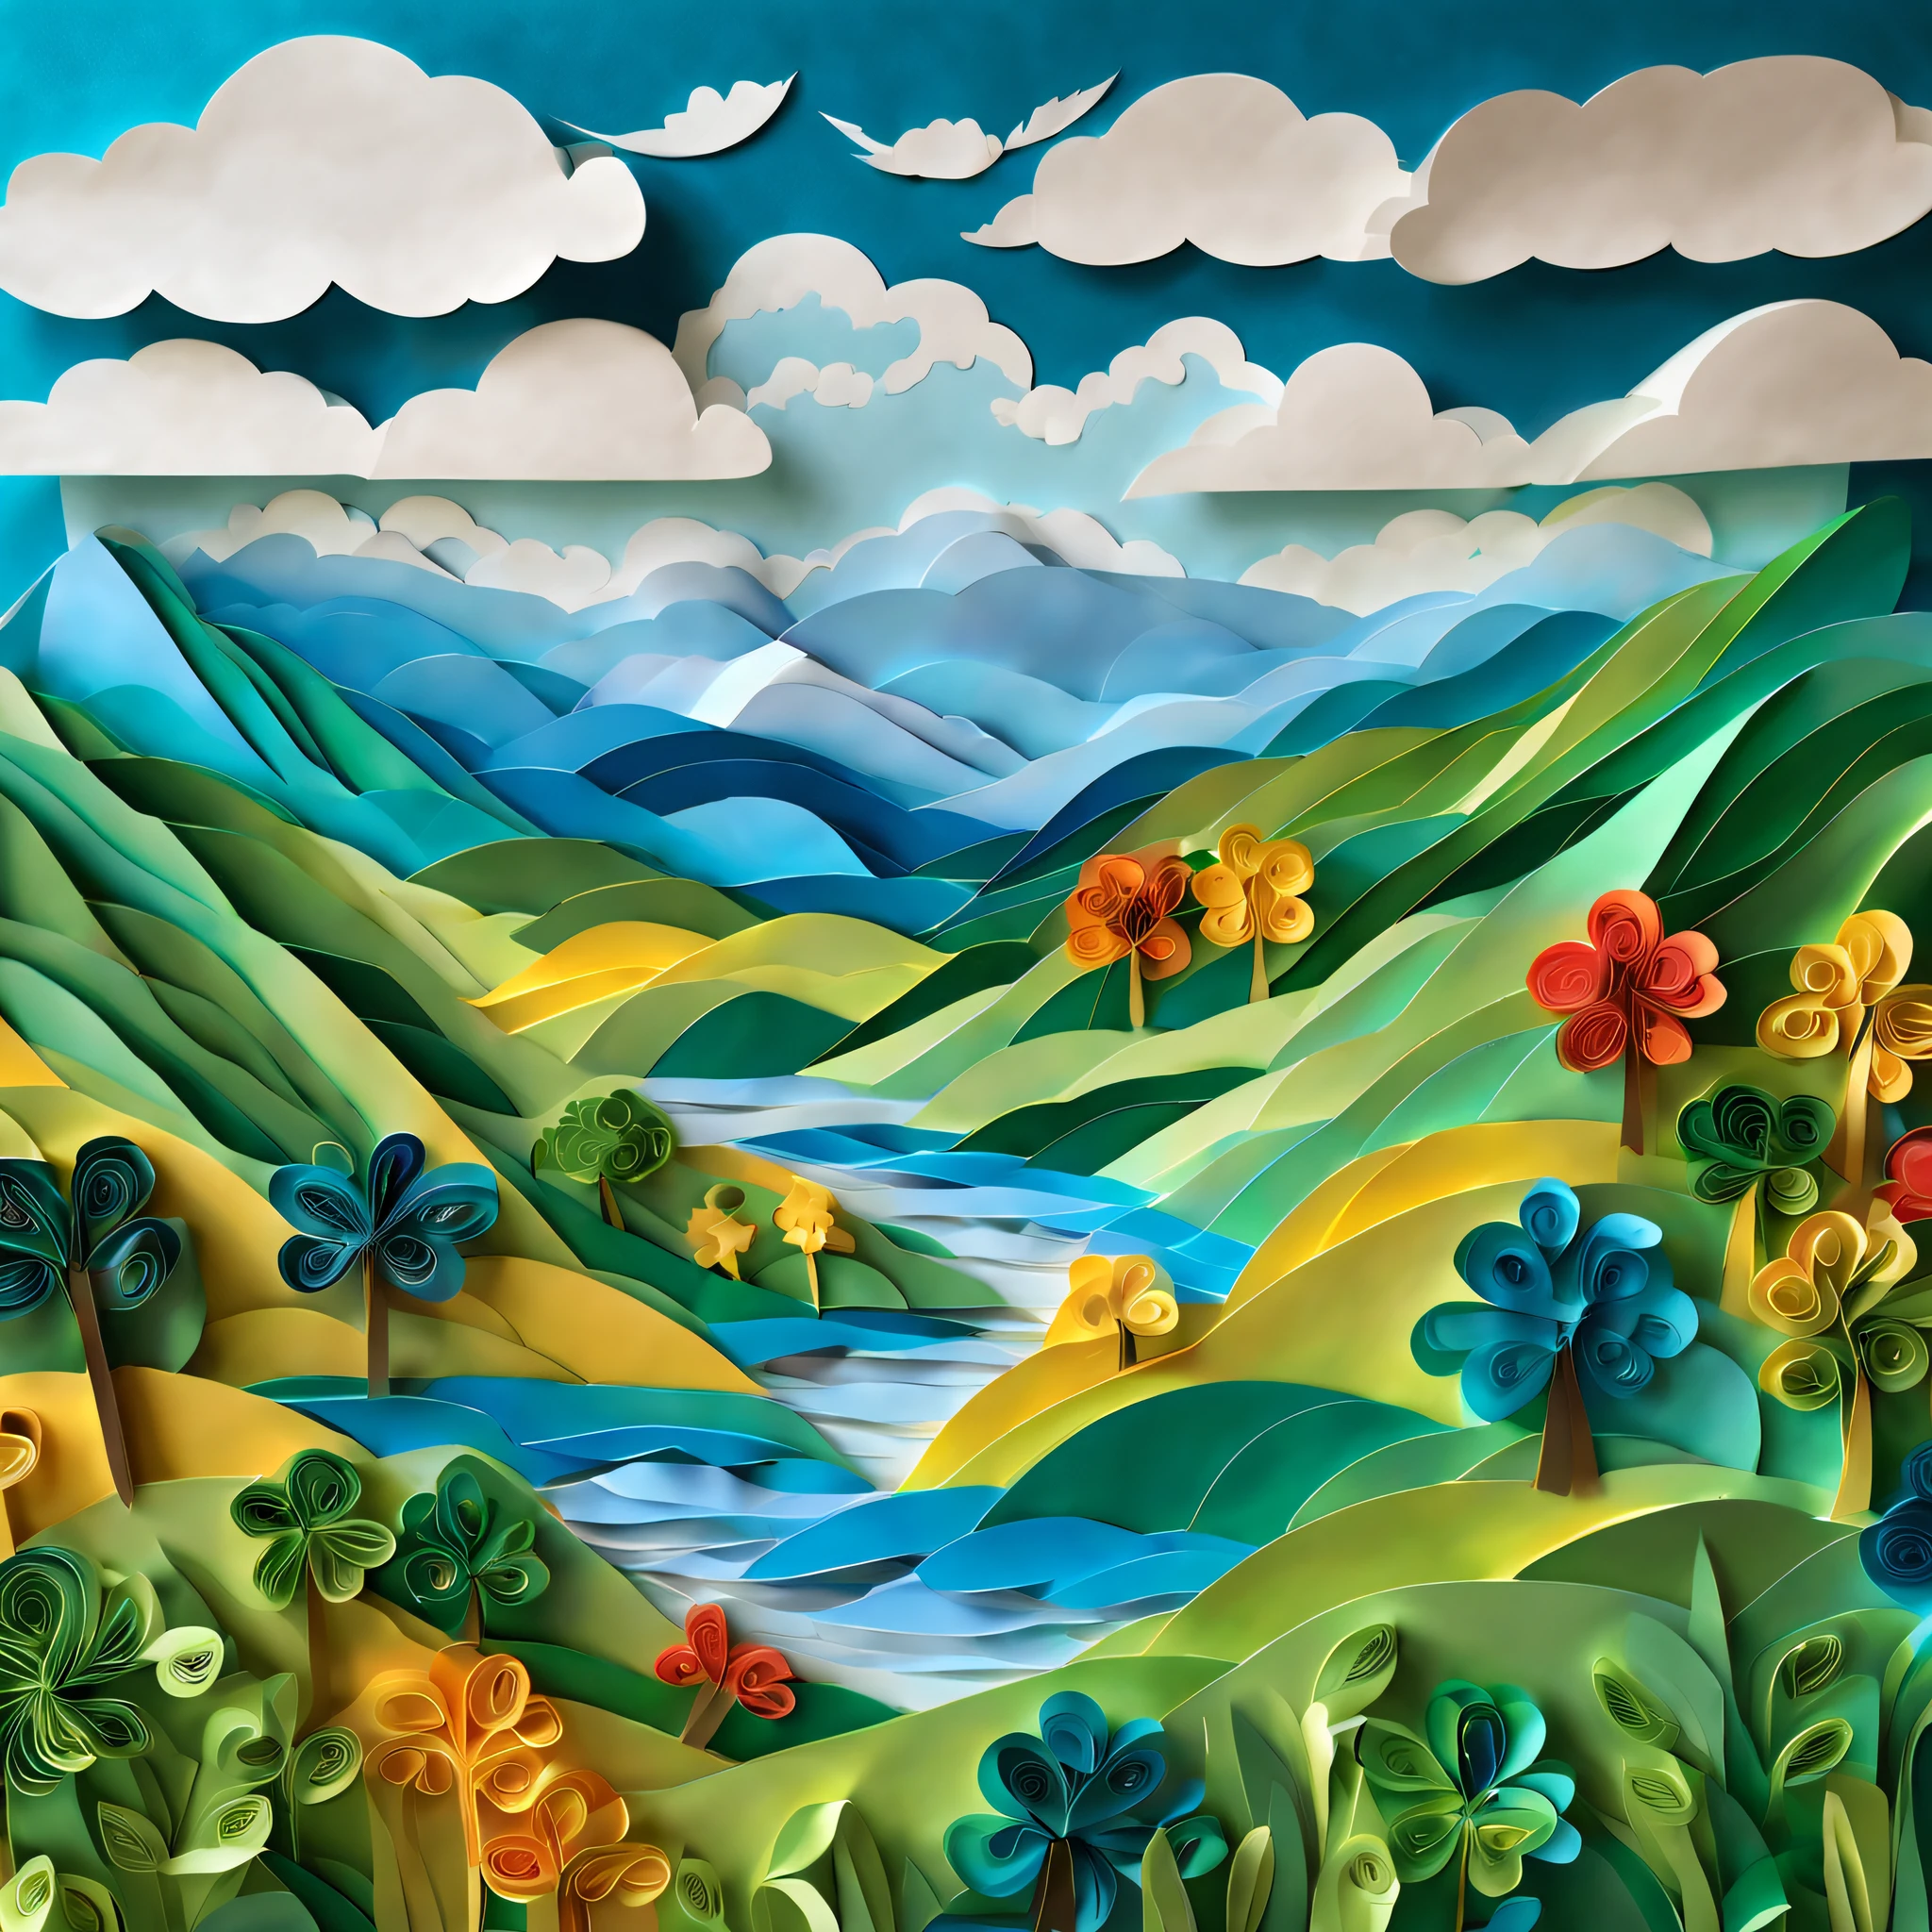 A masterpiece of paper art with a beautiful view of the blue sky, Lots of farmland, Lush green mountains and water in the background，White clouds. The highest standard of image quality, Has a detailed paper texture and a clear focus. Paper art is carefully crafted, The result is a realistic and vivid depiction. vibrant with colors, Blend in harmony with the blues, green color, And whites. The lighting enhances the beauty of the landscape, Soft sunlight illuminates the landscape. This artwork reflects the artistry of paper-cutting,